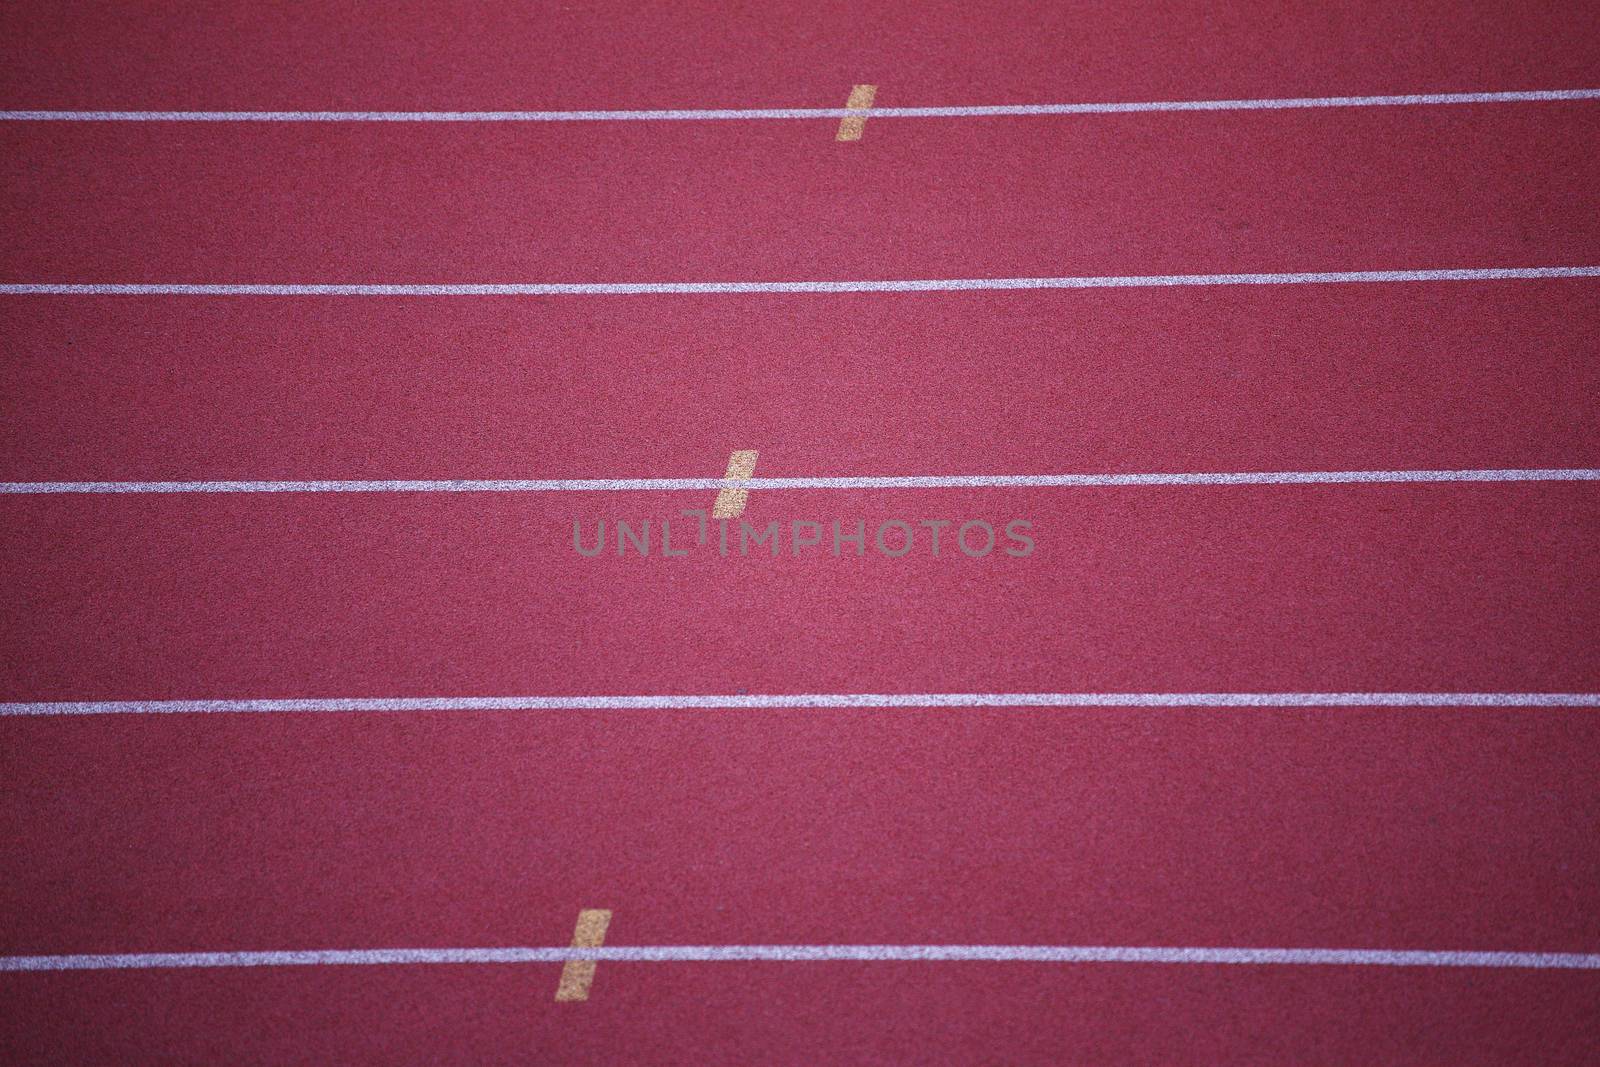 Track - Simple running track background with horizontal lines.